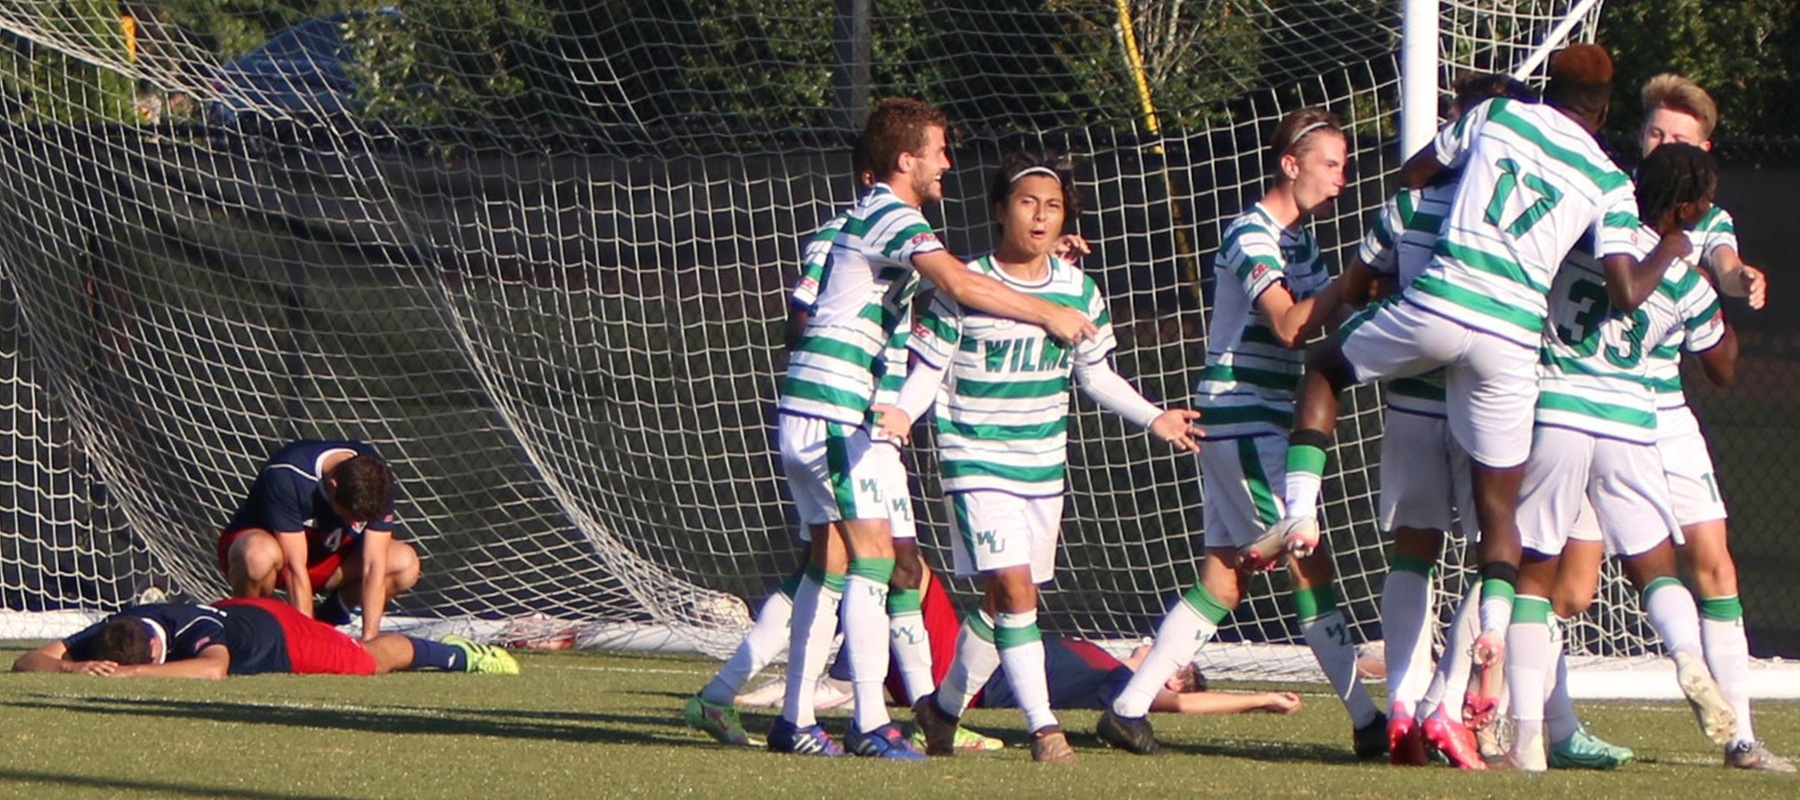 Wilmington University players celebrate the game winning goal during their hard-fought victory over Nyack College during their NCAA men?s soccer match at the Wilmington University sports facility in Newark, DE. October 2, 2021. Roger Bain, Photographer